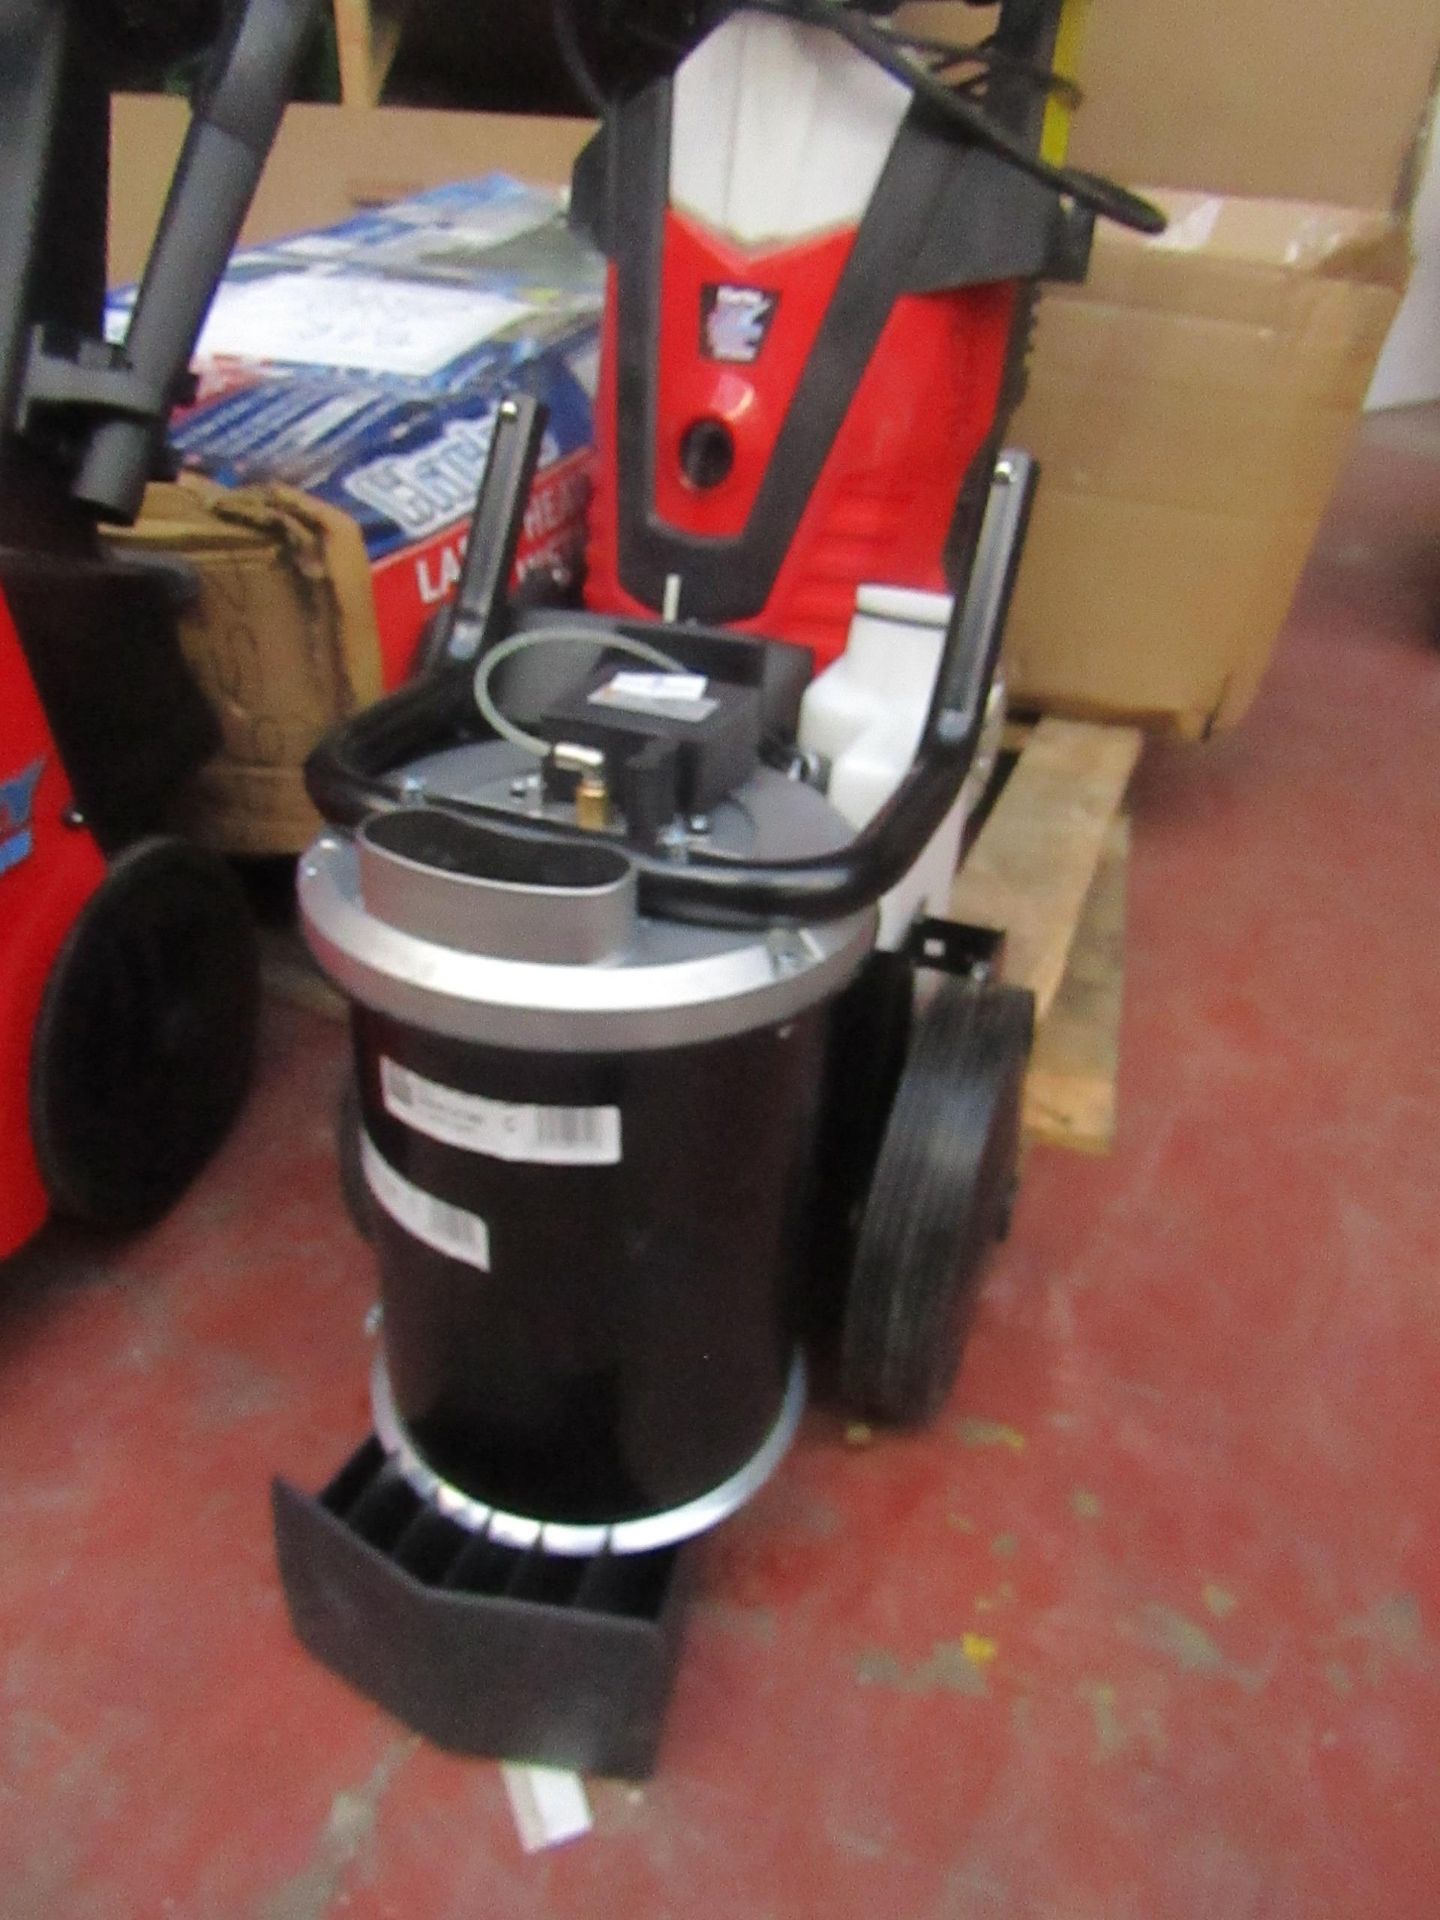 1x CL WASH HARRY 230V 2 2598 This lot is a Machine Mart product which is raw and completely